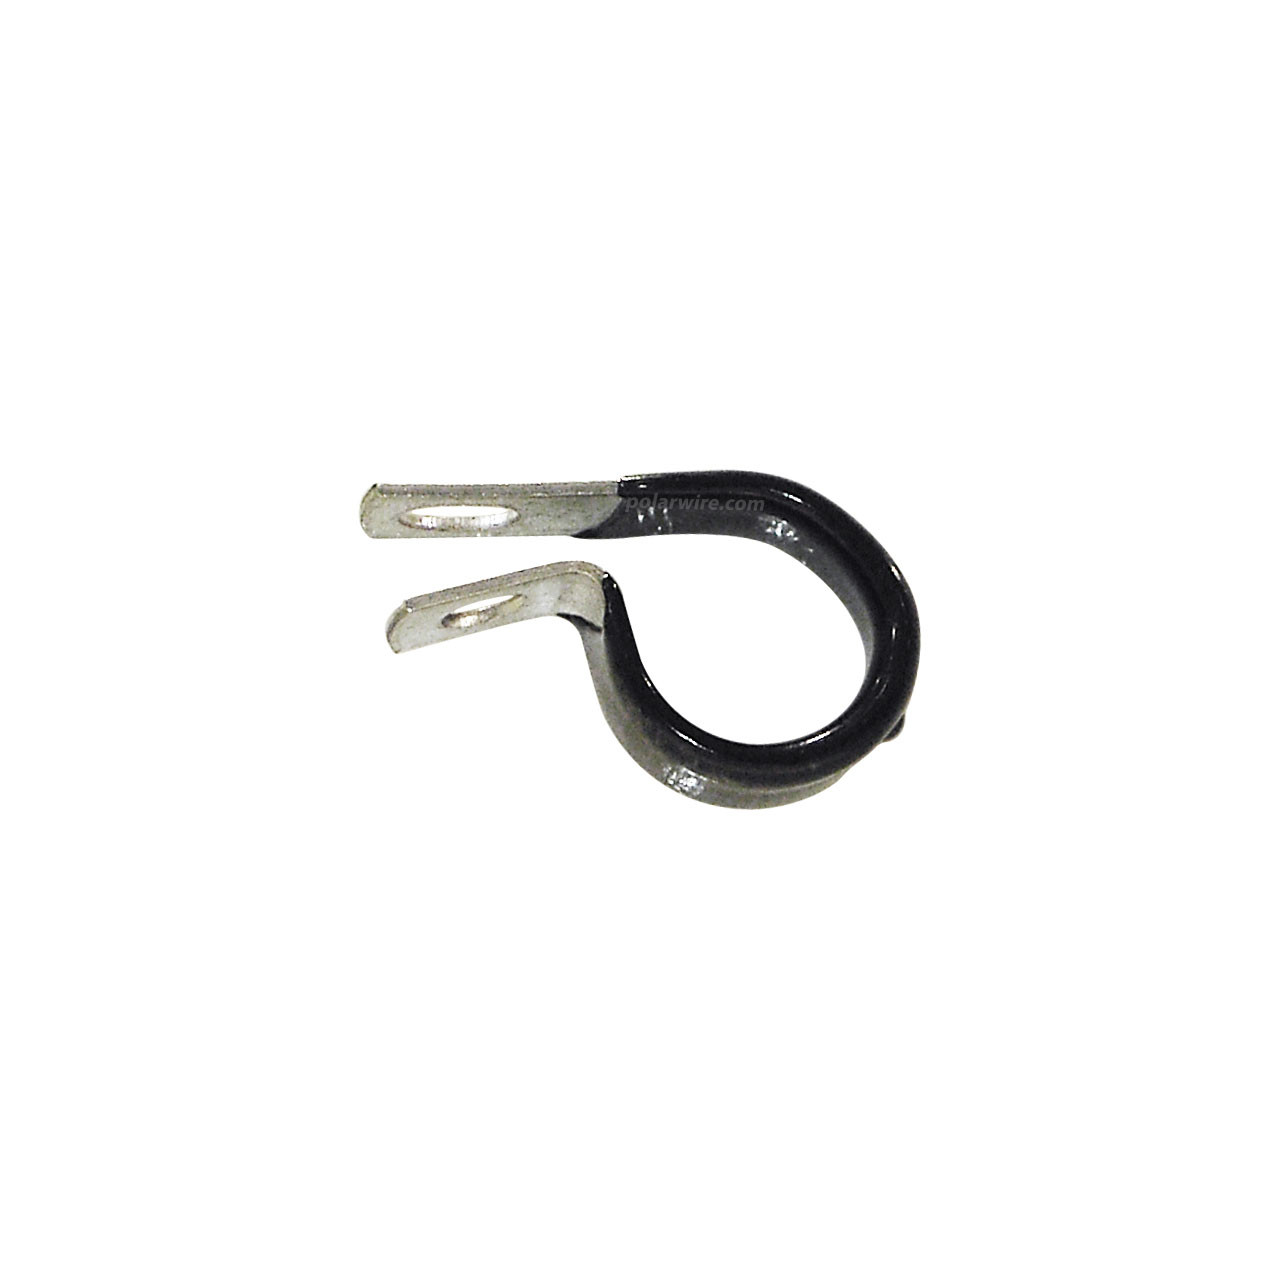 CABLE CLAMP METAL 3/4"